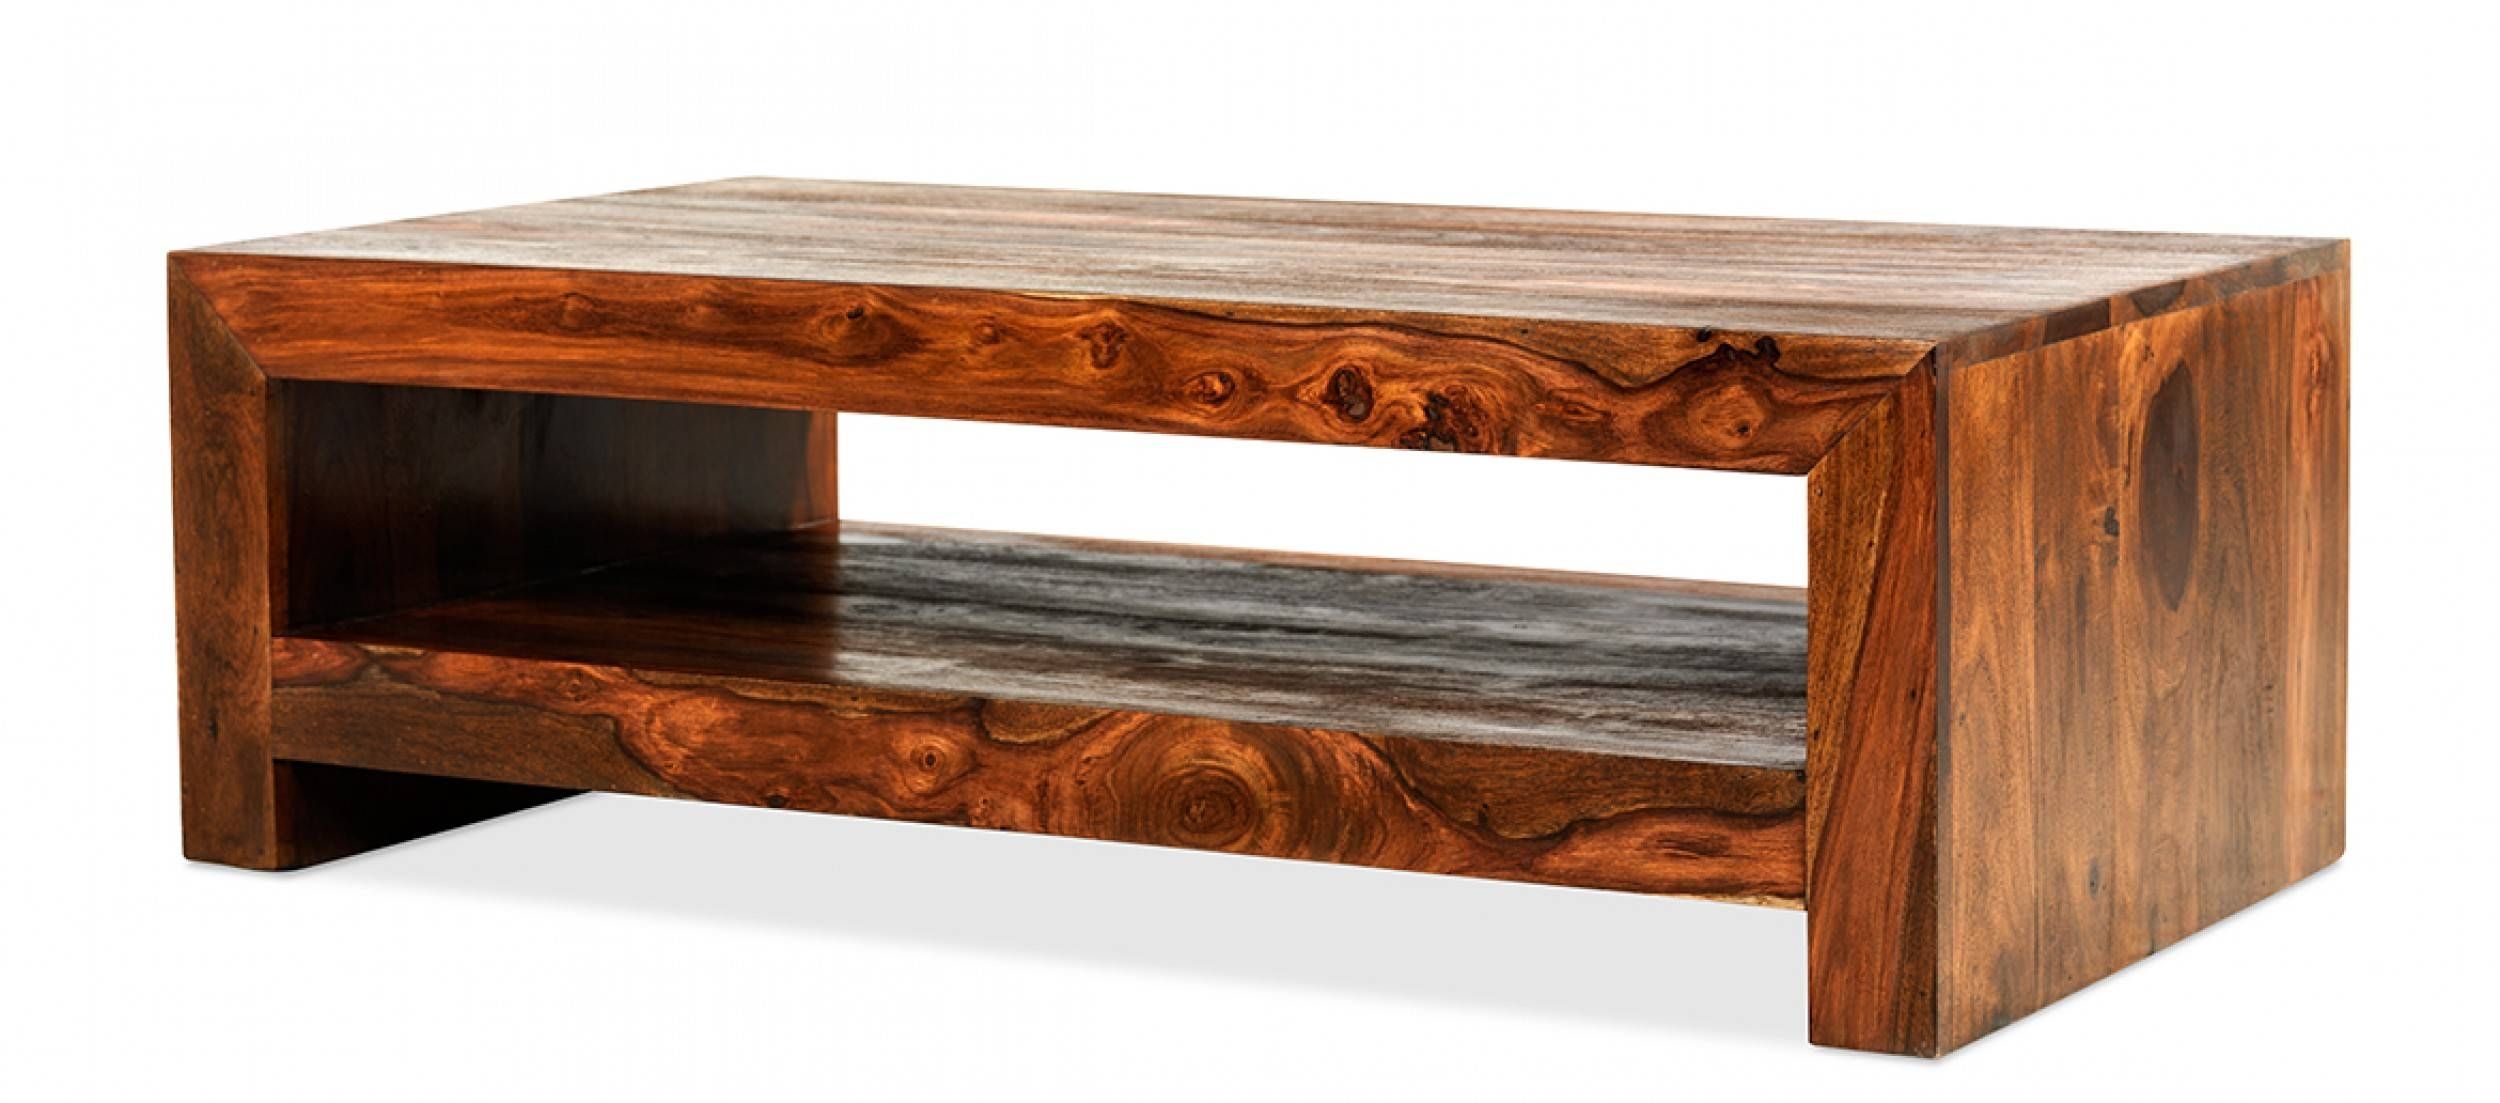 Cube Sheesham Contemporary Coffee Table | Quercus Living Intended For Sheesham Coffee Tables (View 1 of 30)